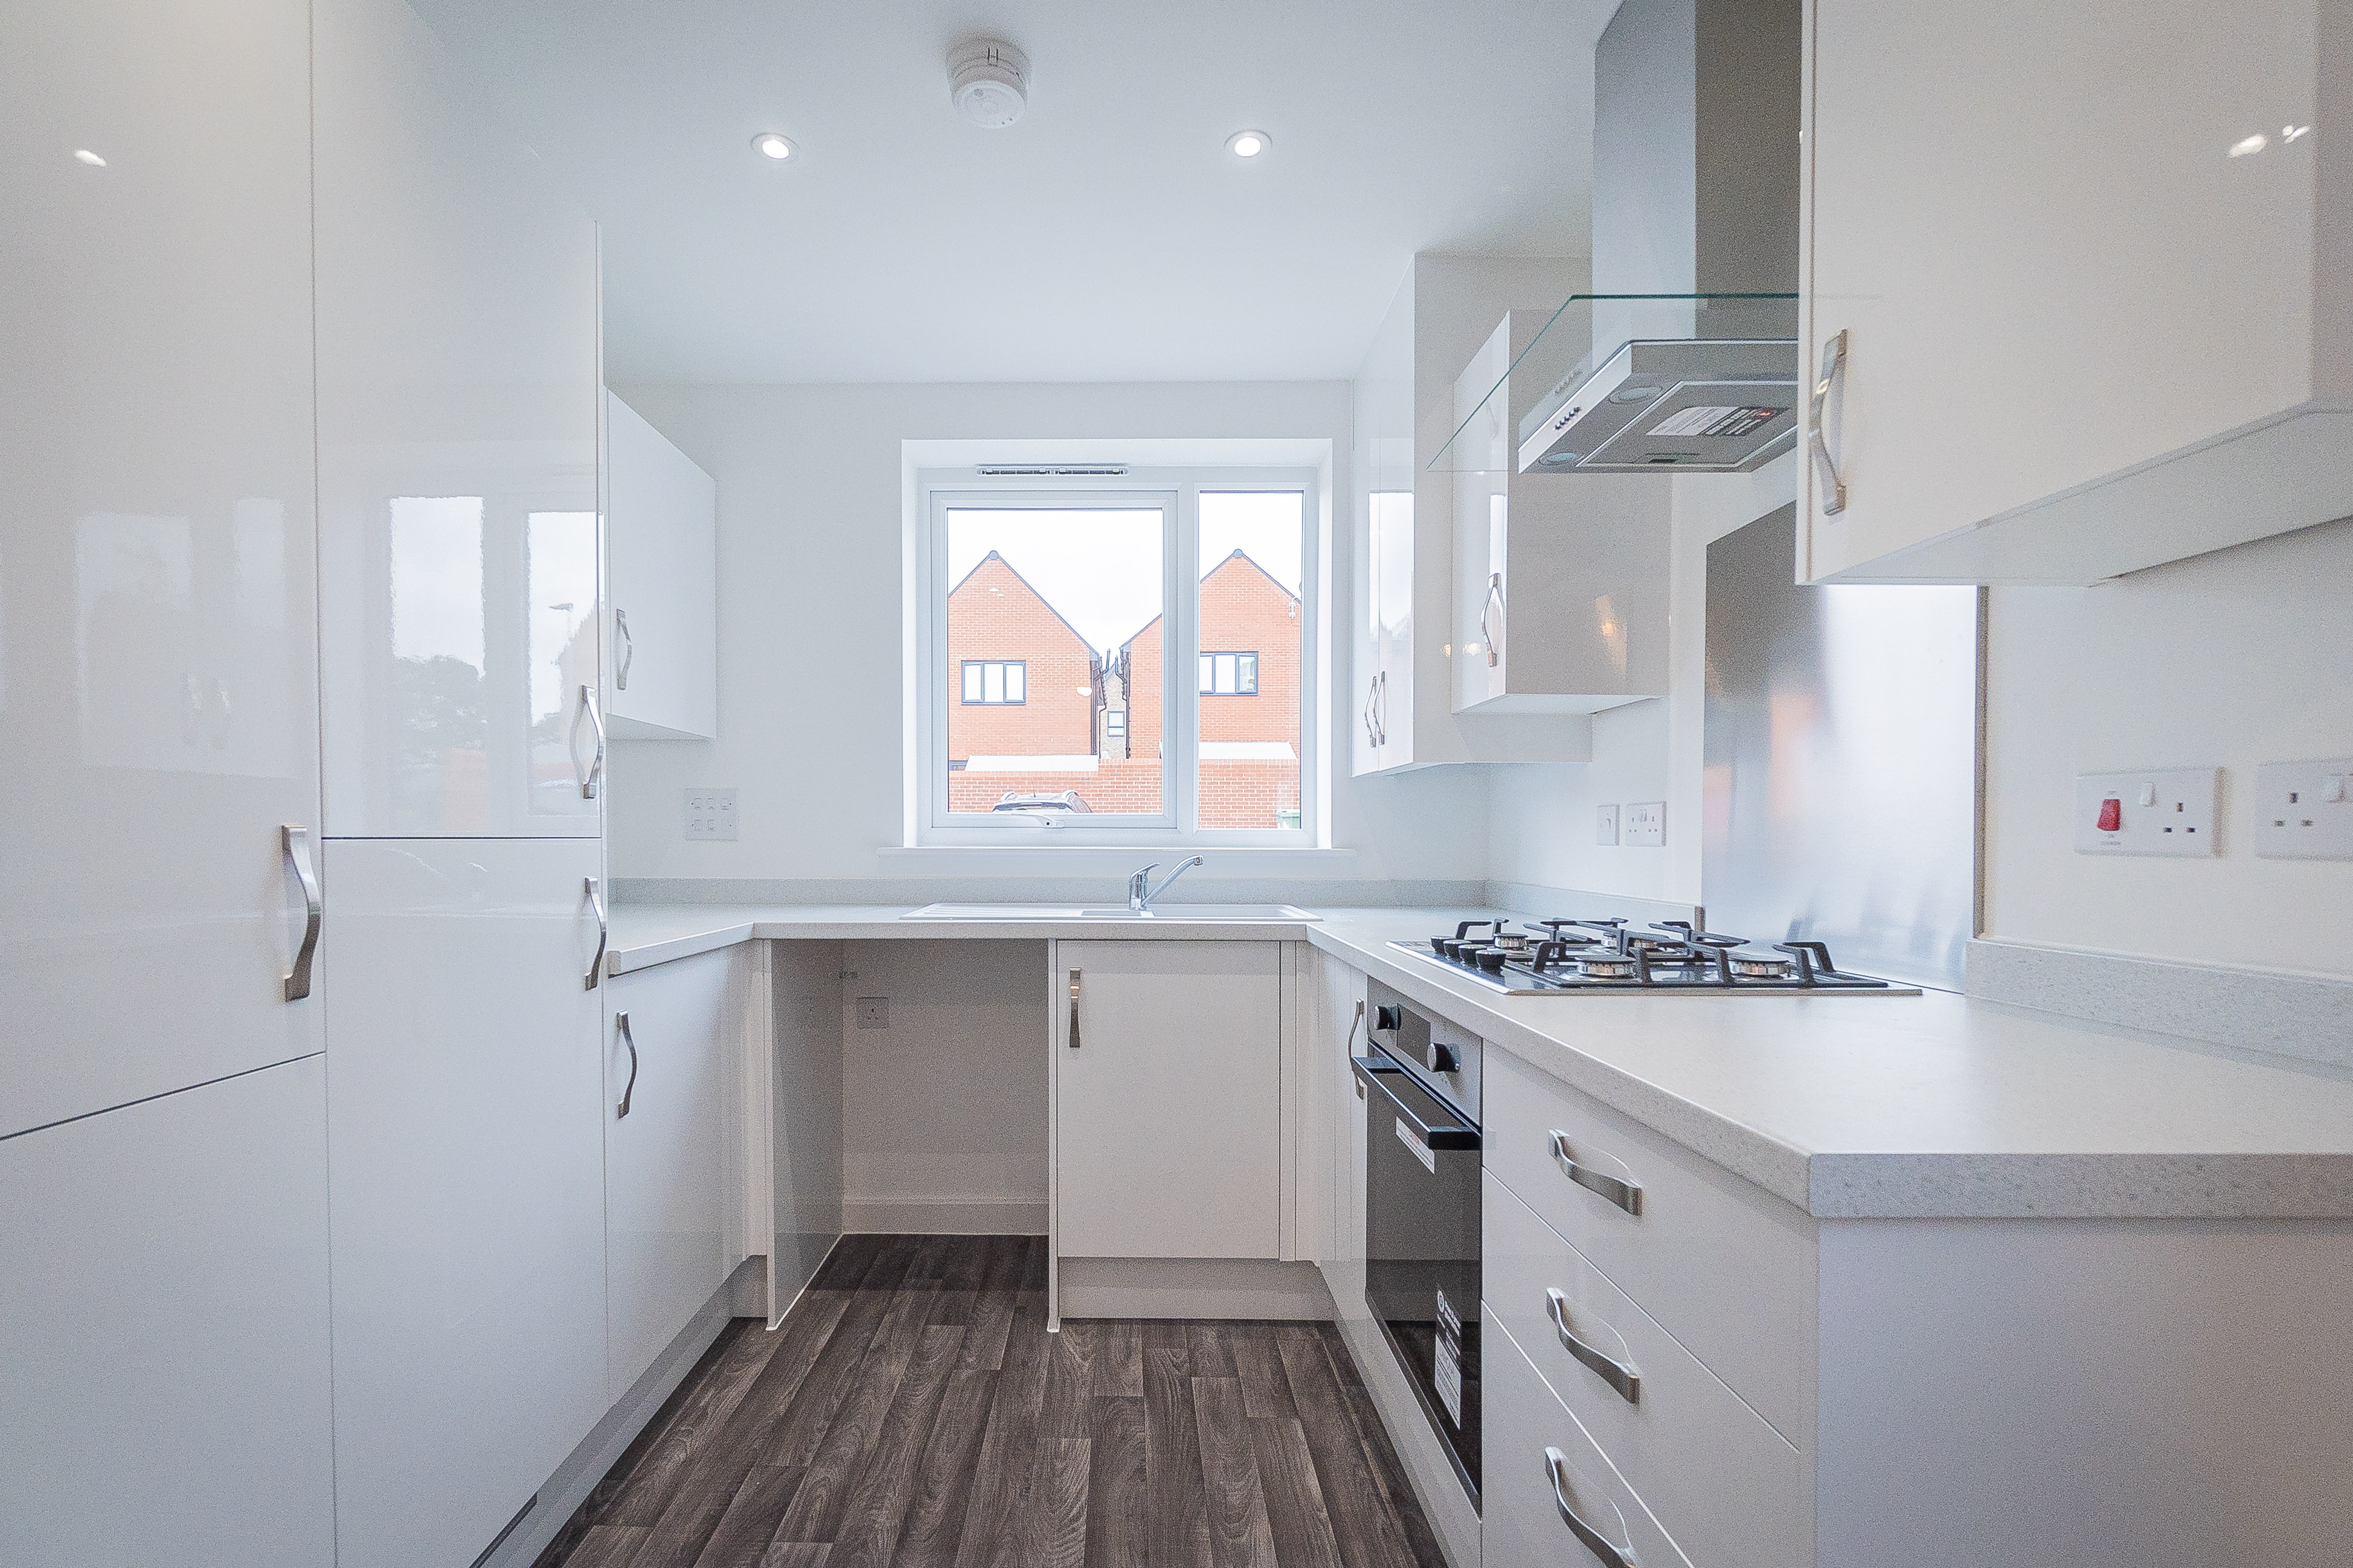 Kitchen of a 3 Bedroom House at Whiteley Meadow available for Shared Ownership